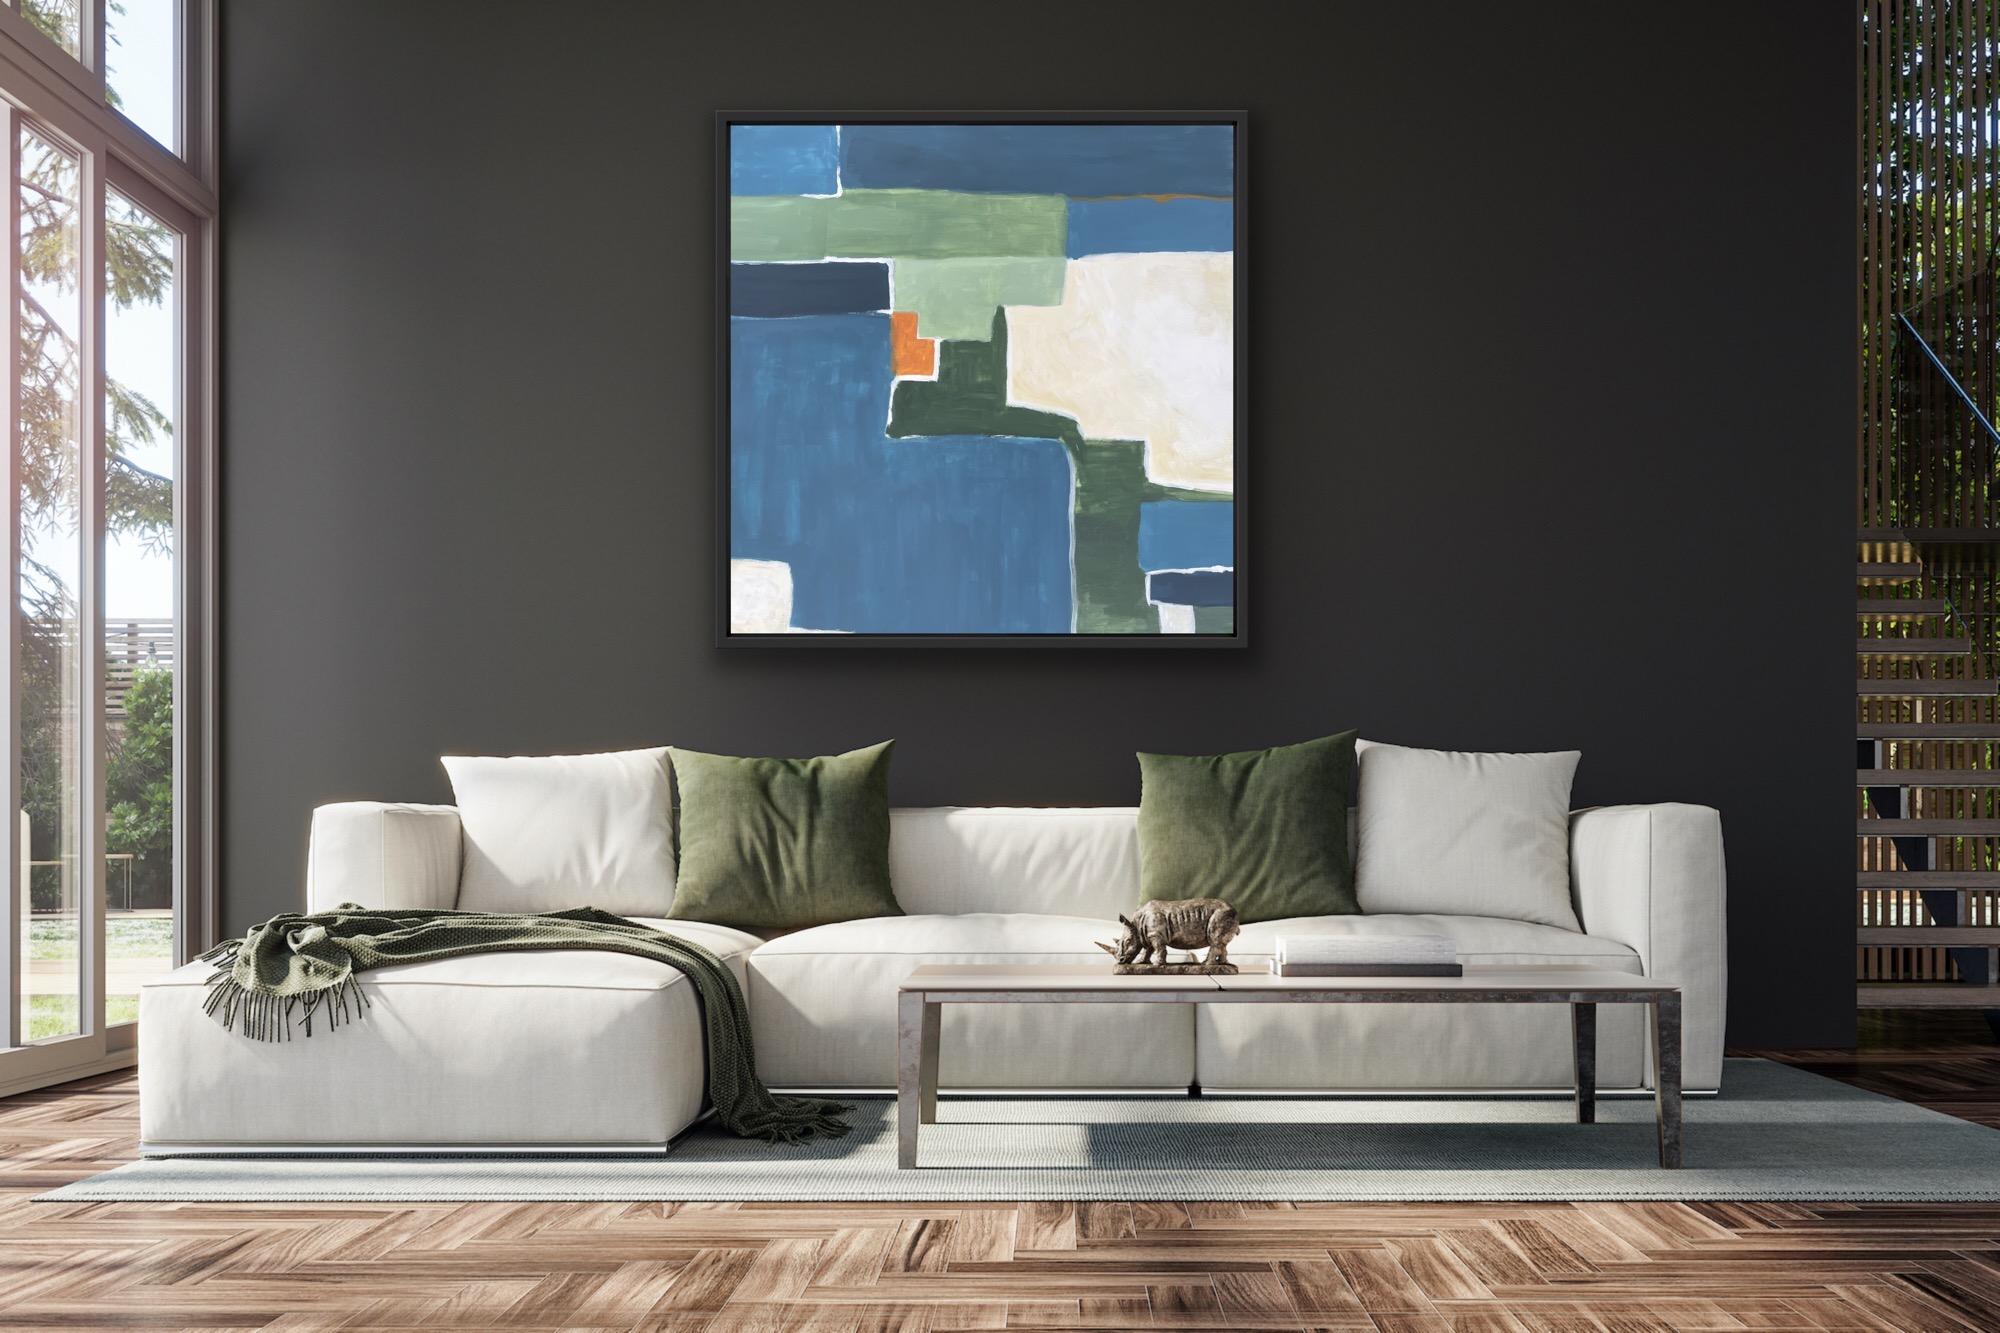 Italian Dreaming is an original geometric abstract painting by artist Fleur Park. Fleur Park, artist and painter, has abstract and minimalist artworks available at Wychwood Art in our gallery and online. Fleur Park studied to fine art and history of